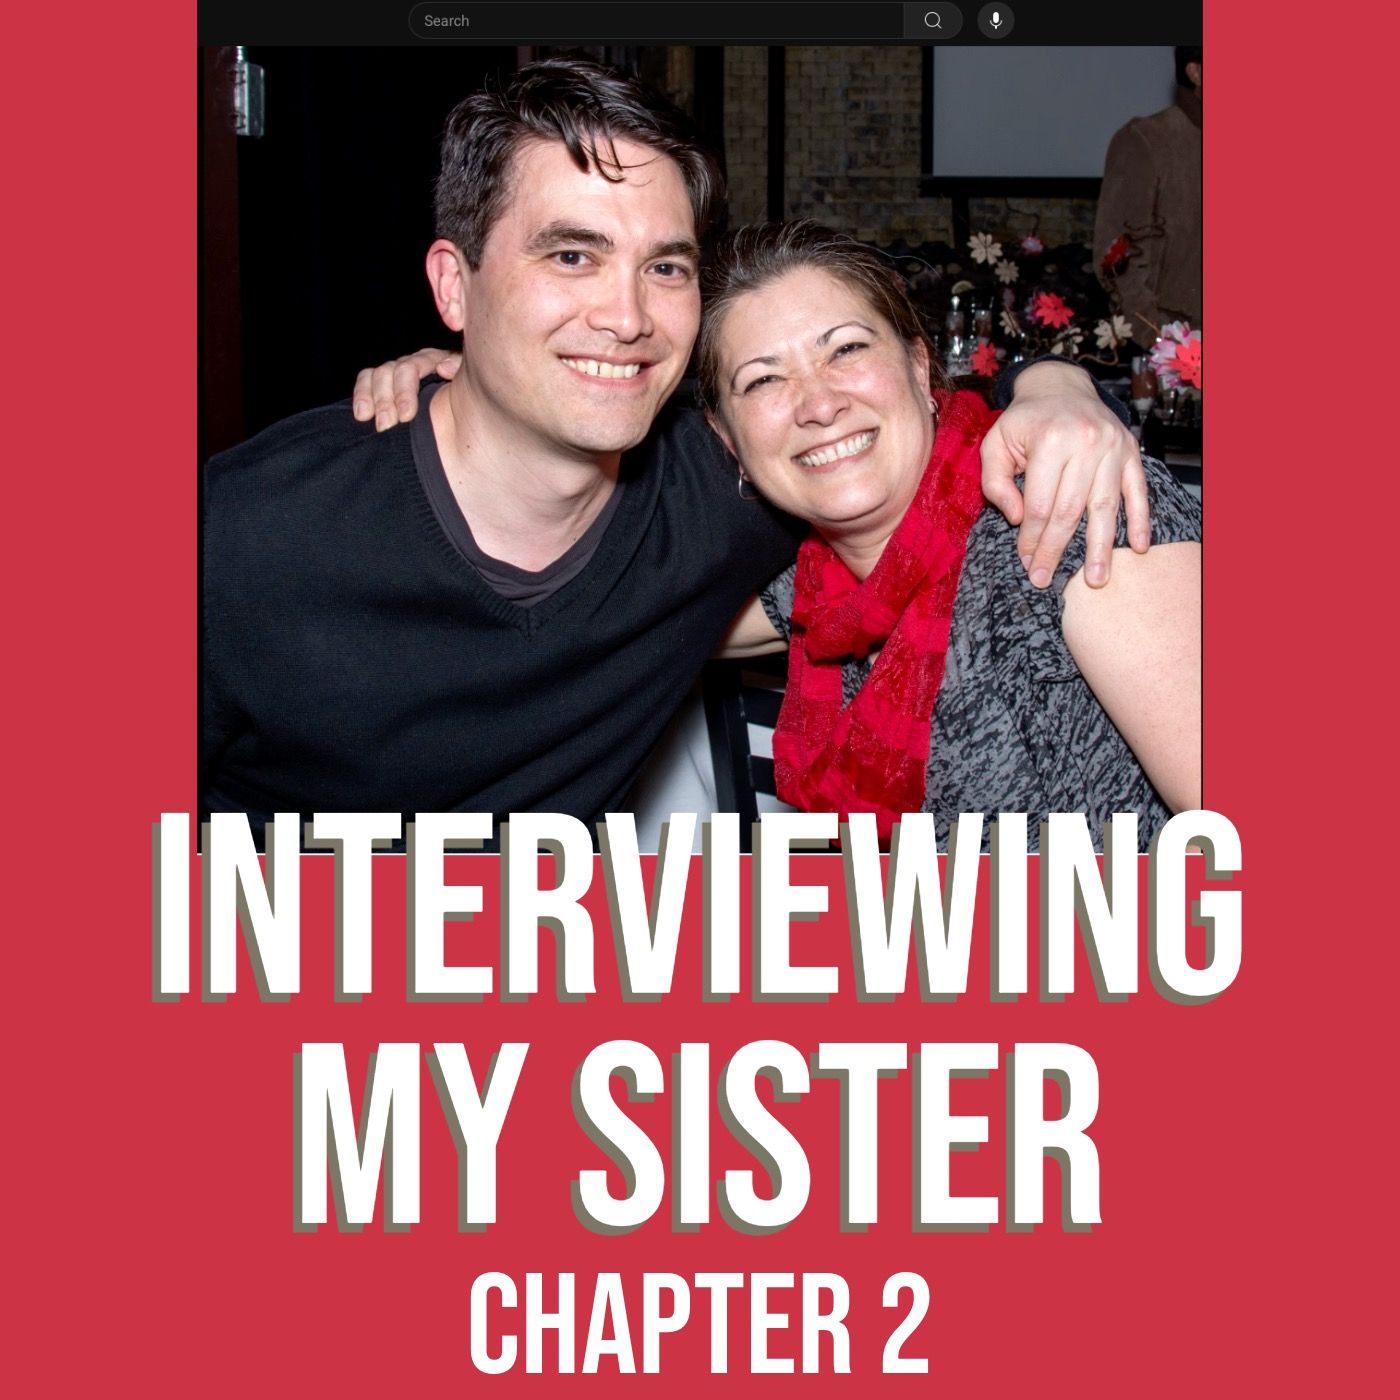 Interviewing My Sister (Chapter 2)